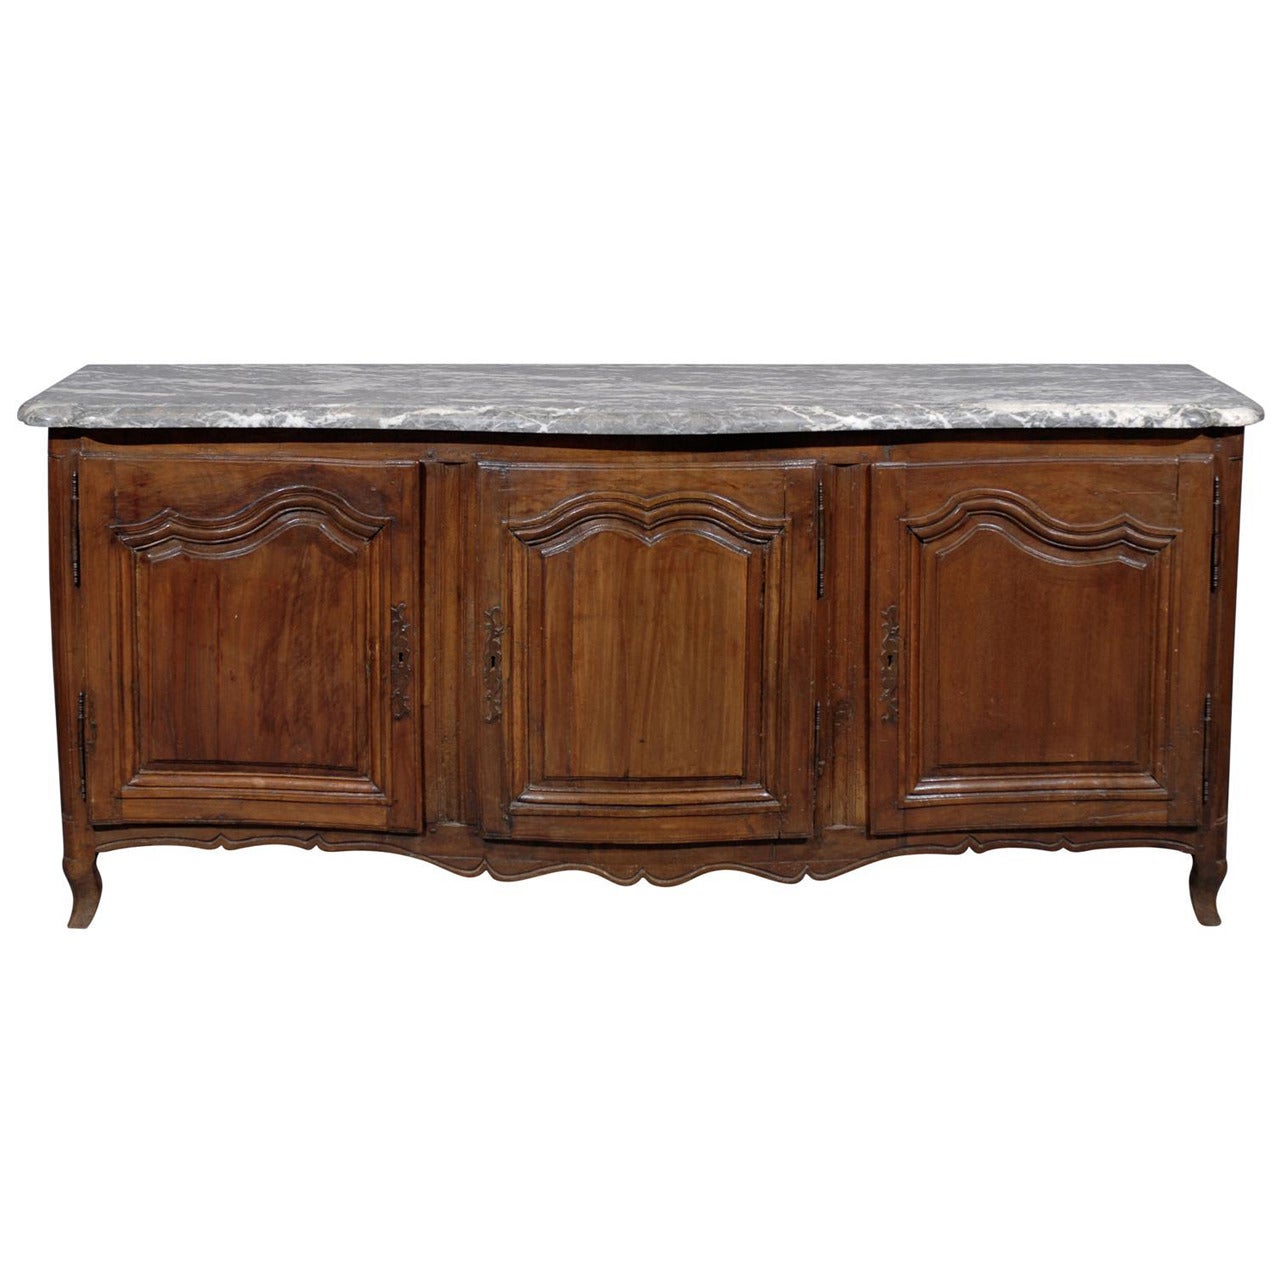 18th Century French Louis XV Walnut Enfilade with Grey Marble Top